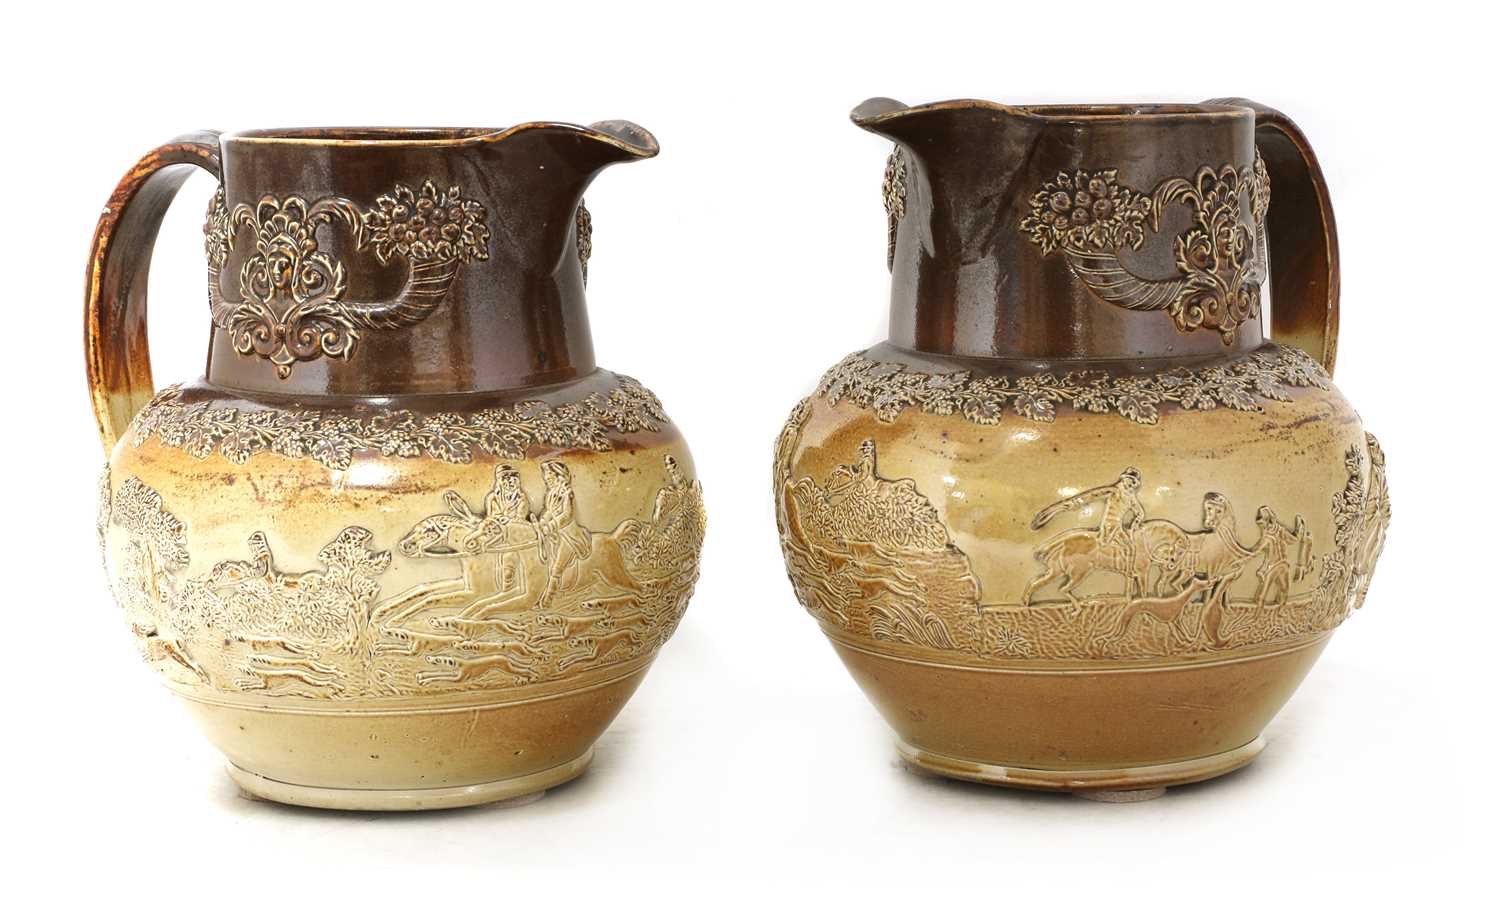 Lot 89 - A pair of large stoneware jugs